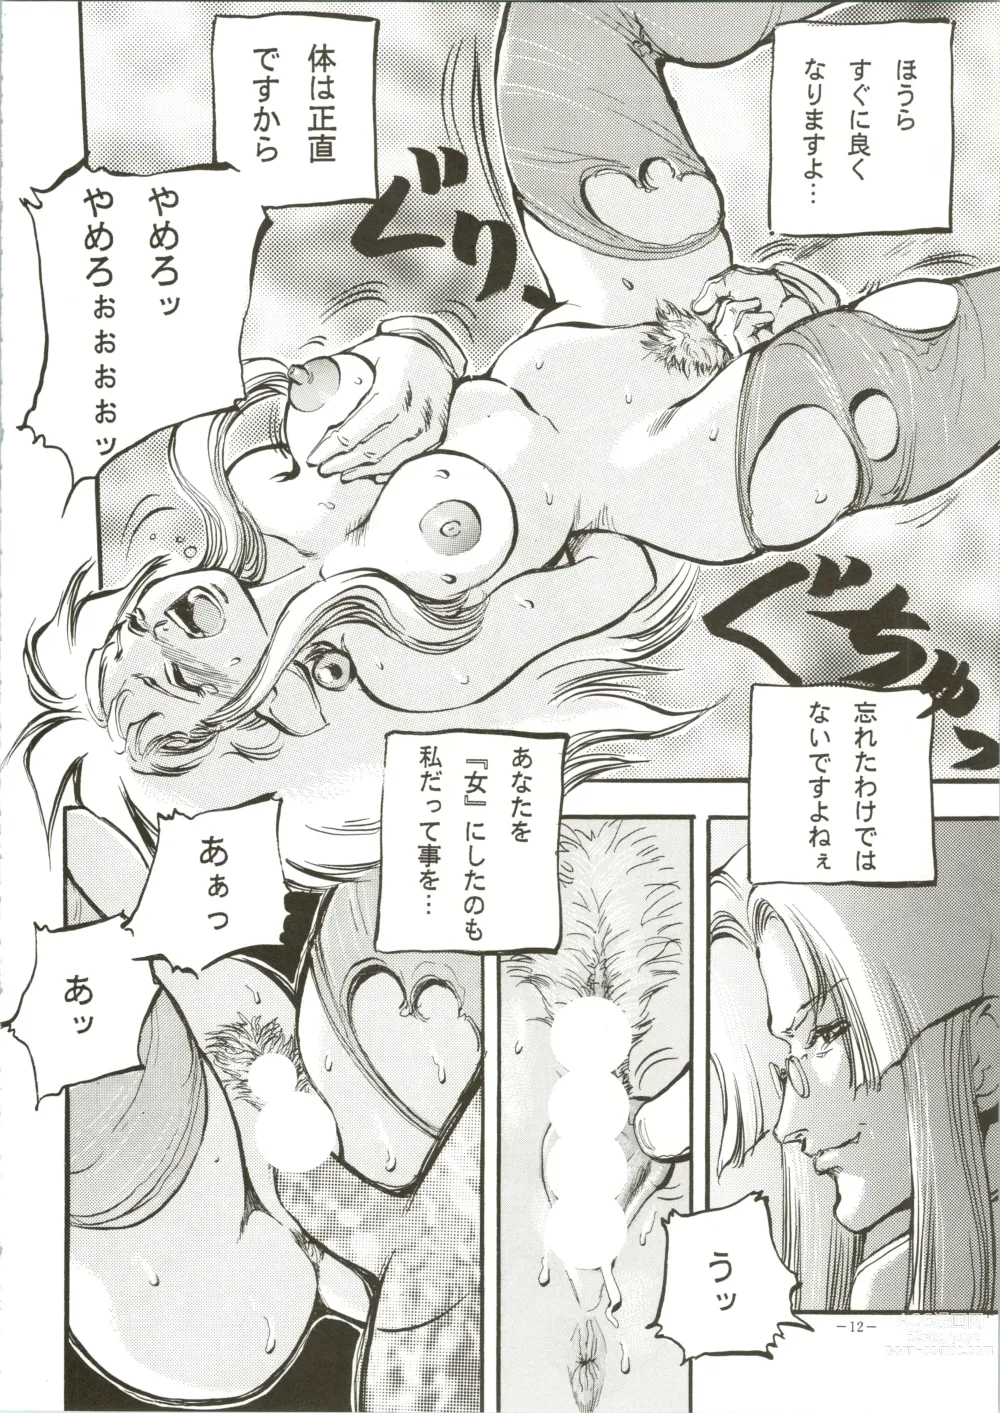 Page 12 of doujinshi Model DX